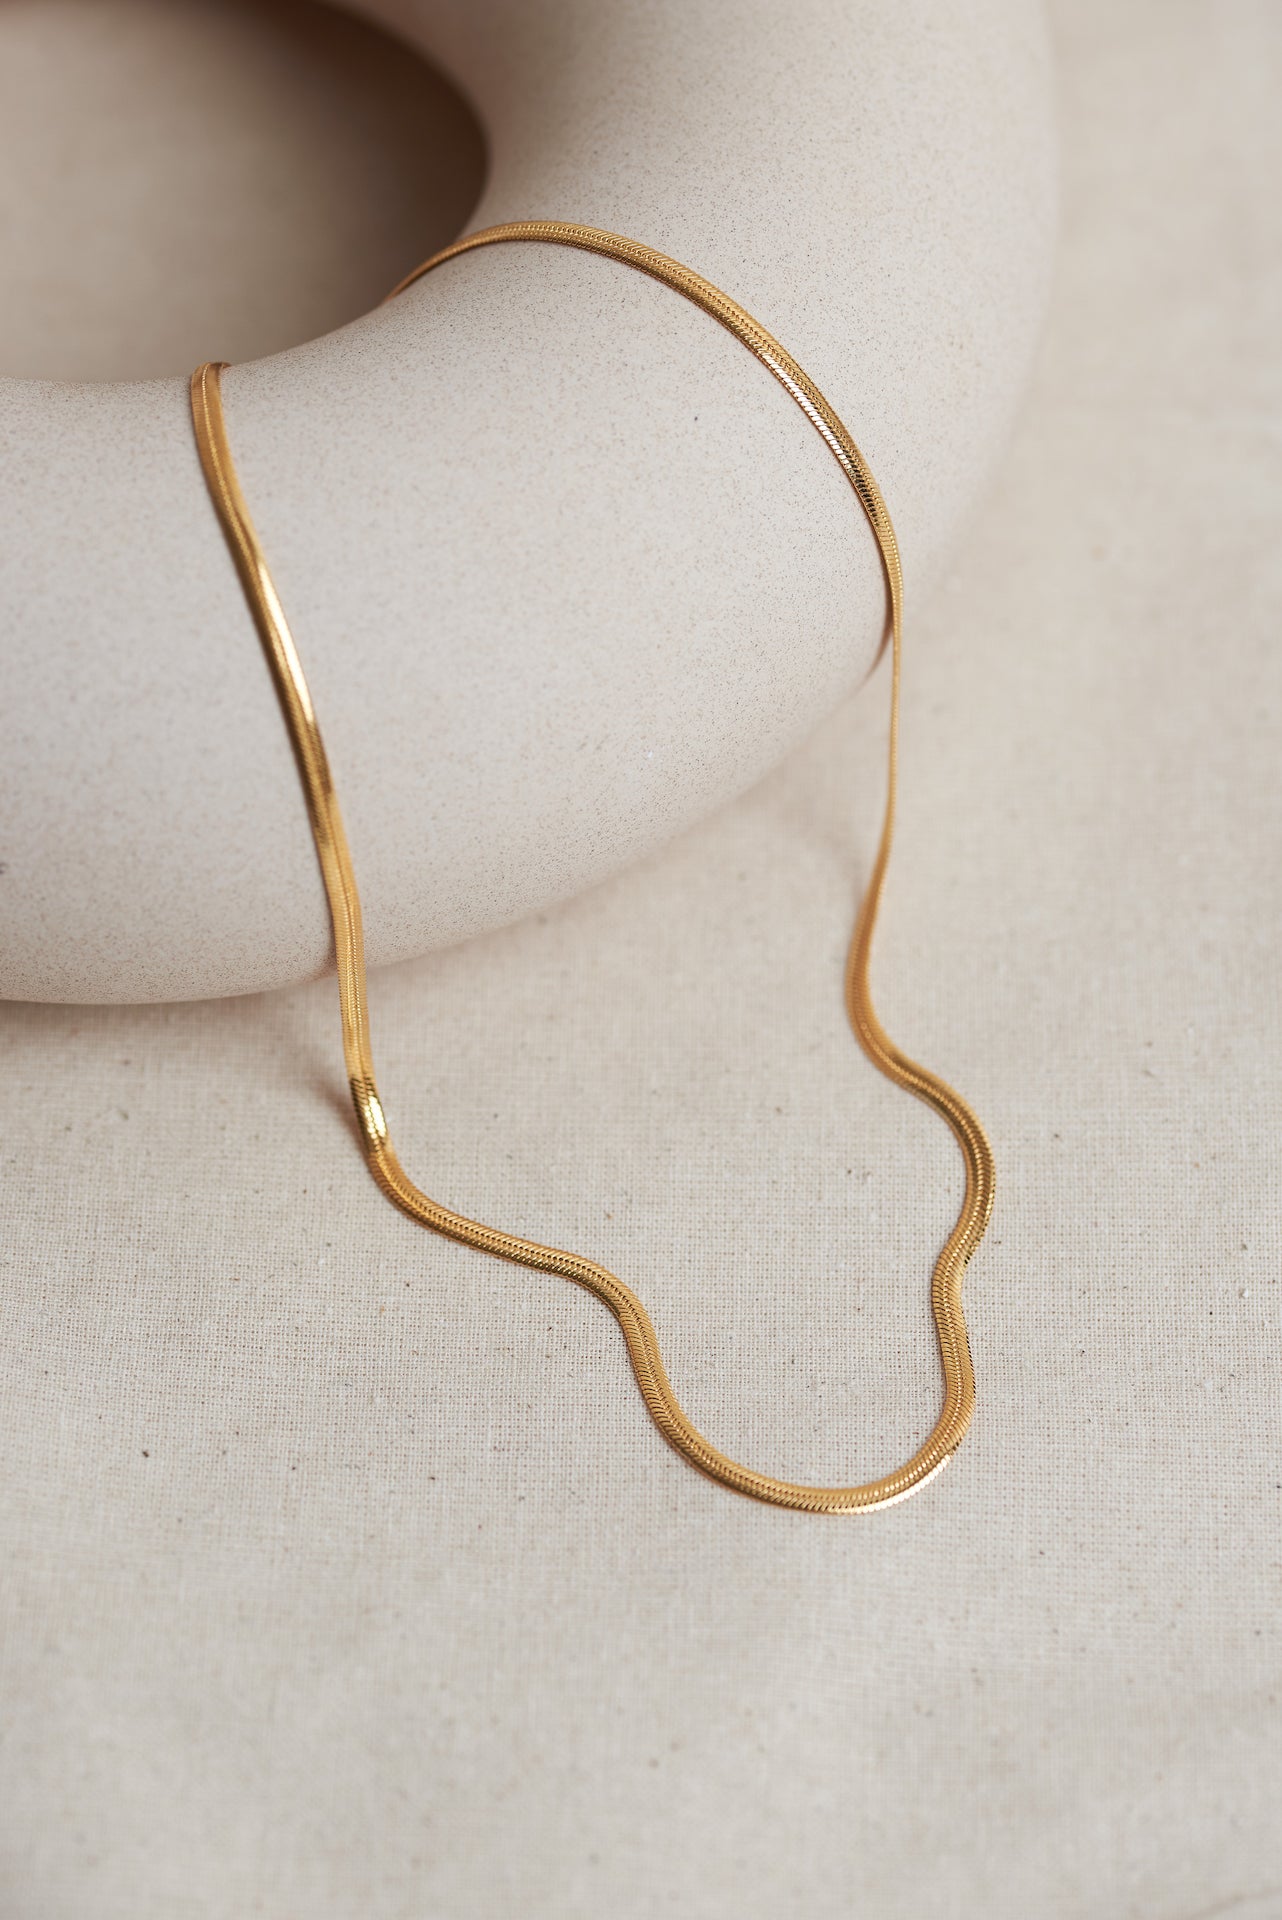 Designed by Megan Collins, the "Flow Necklace" is a classic must-have in every minimalists’ wardrobe. Created to represent the perfect equilibrium between stability and change.